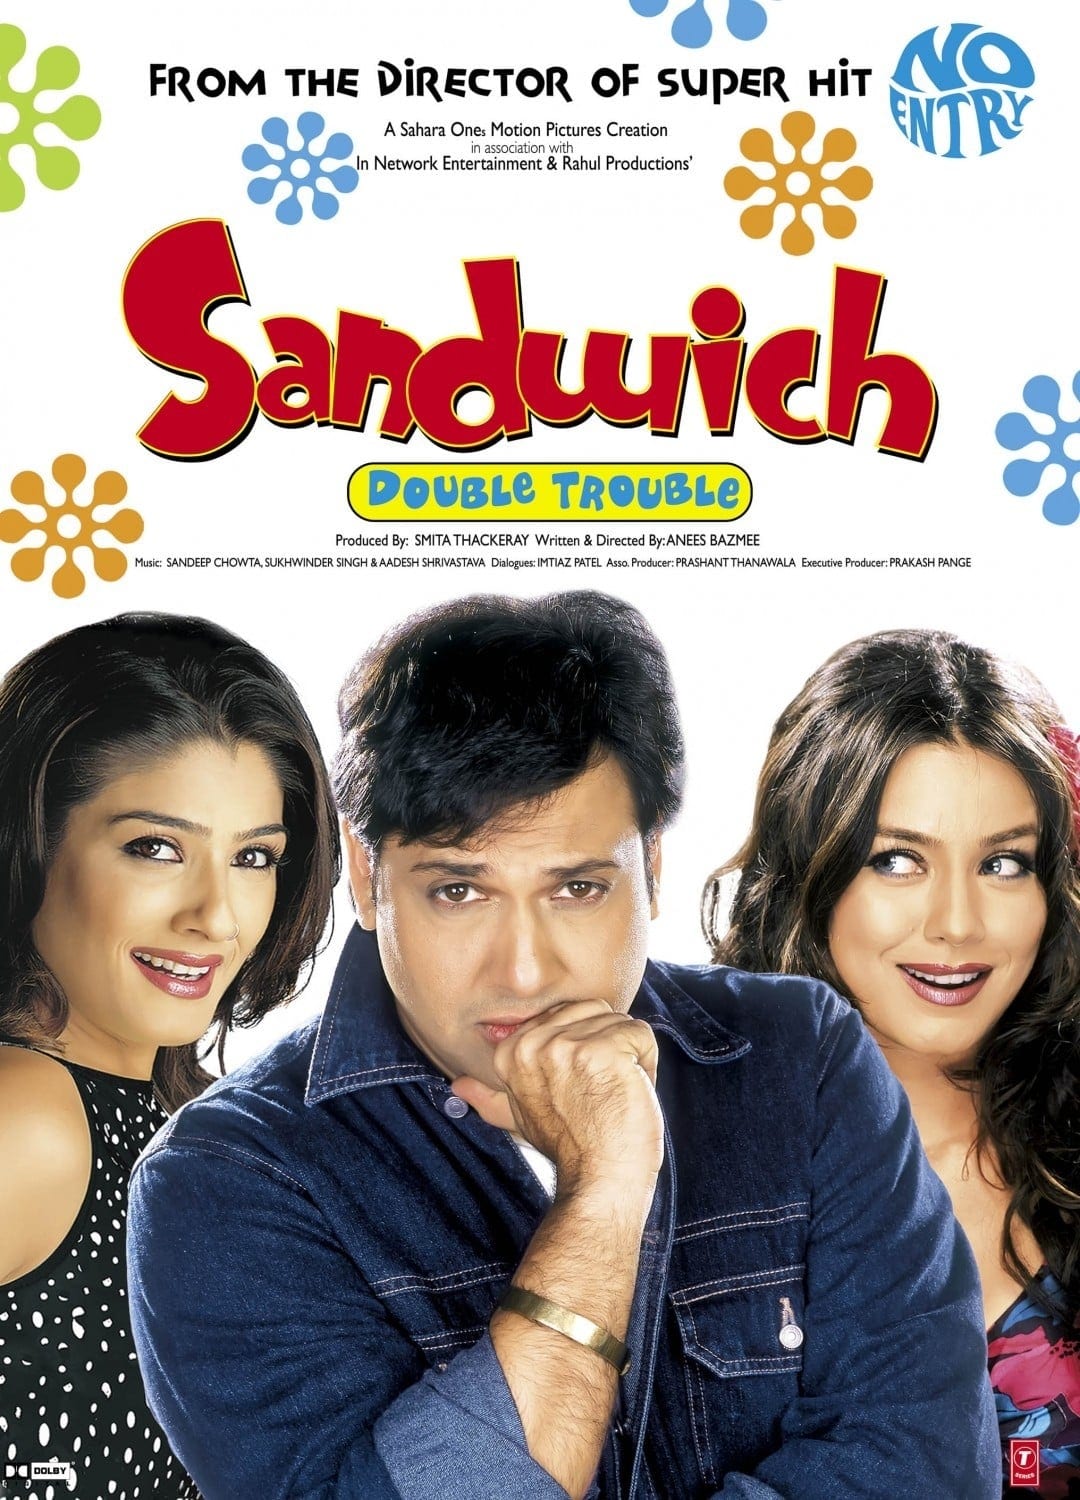 Poster for the movie "Sandwich"